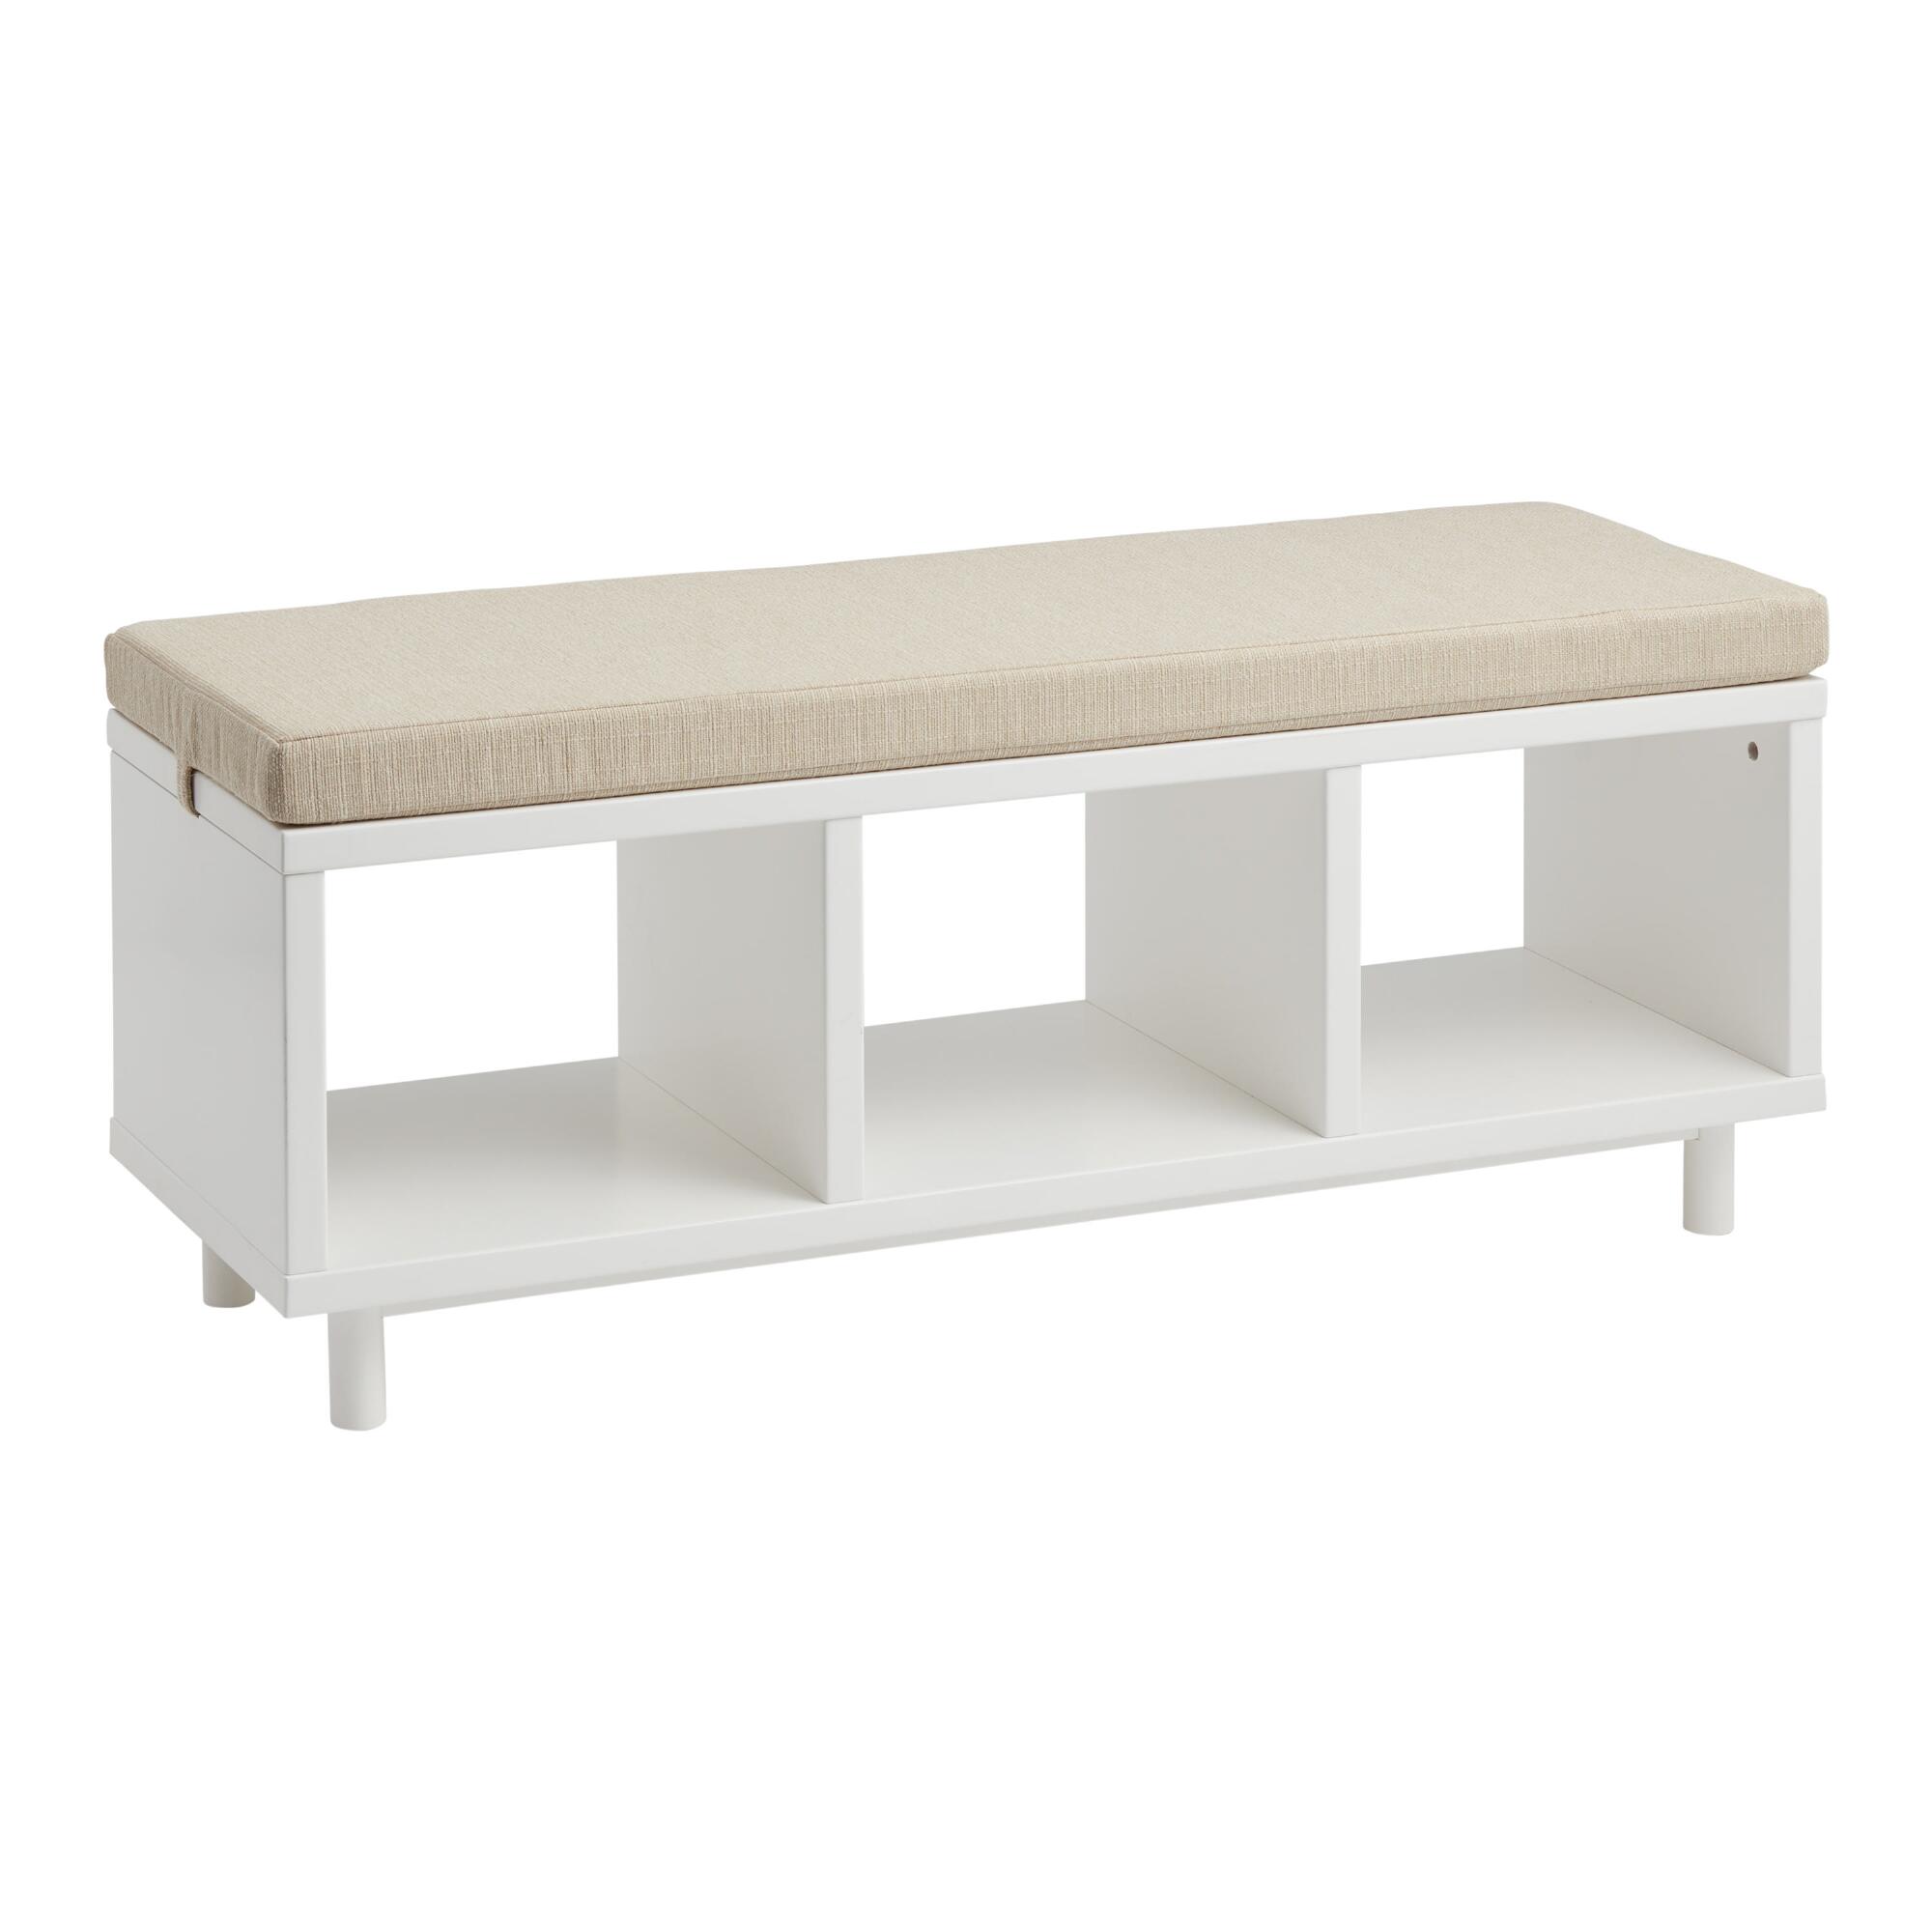 White Wood Amelie Kids Storage Bench with Cushion: White/Natural by World Market